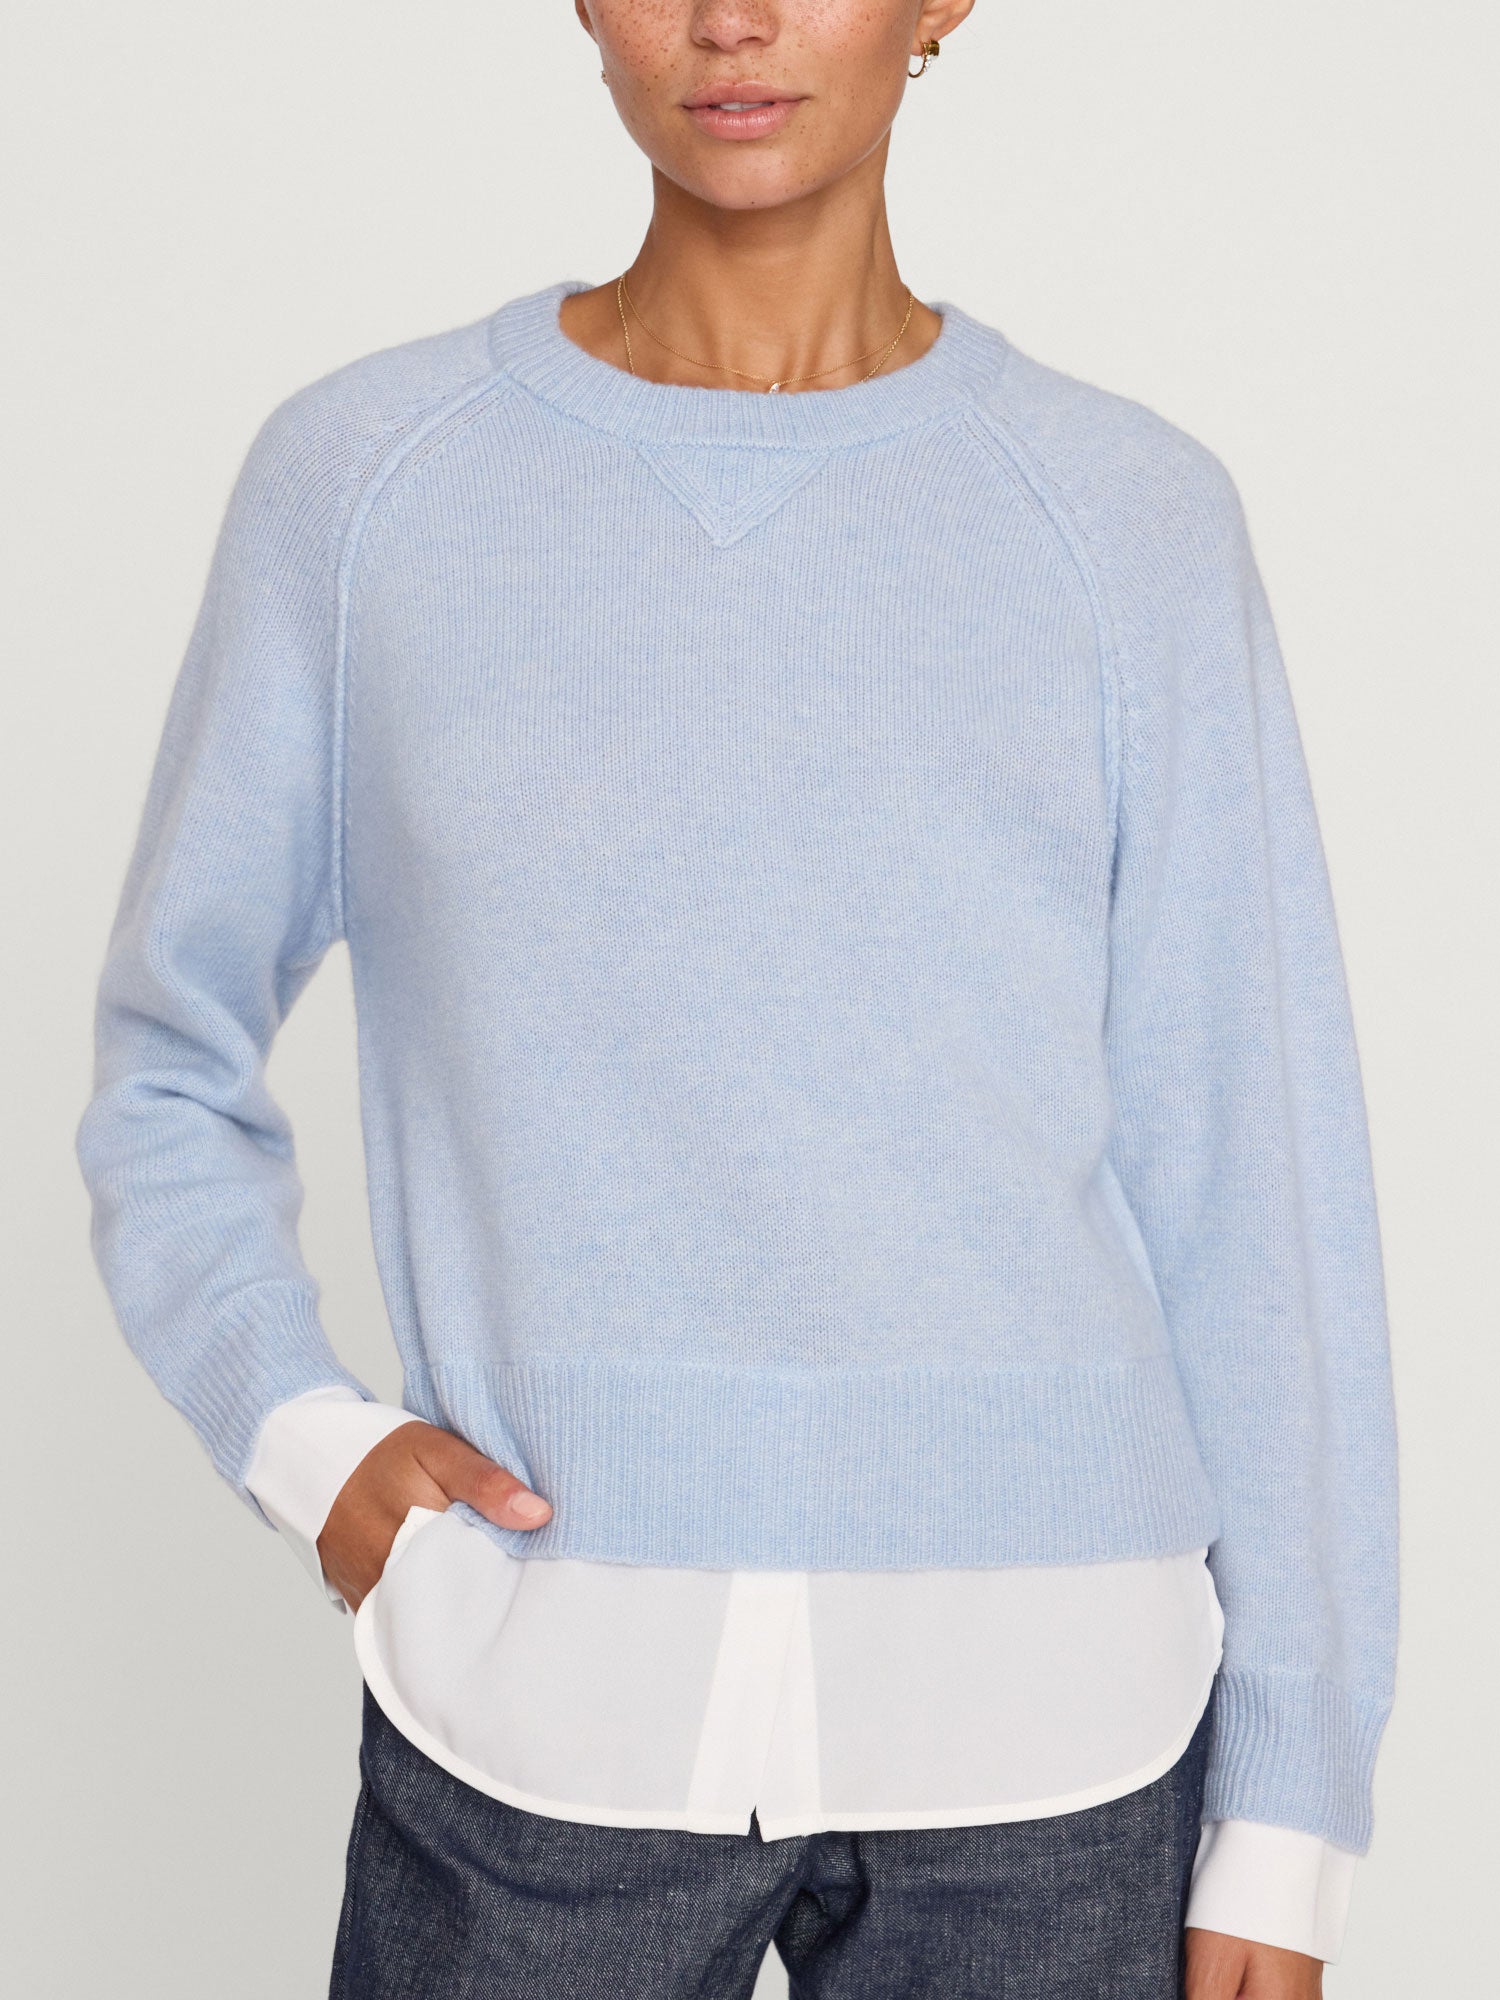 Looker Layered crewneck light blue sweater front view 3